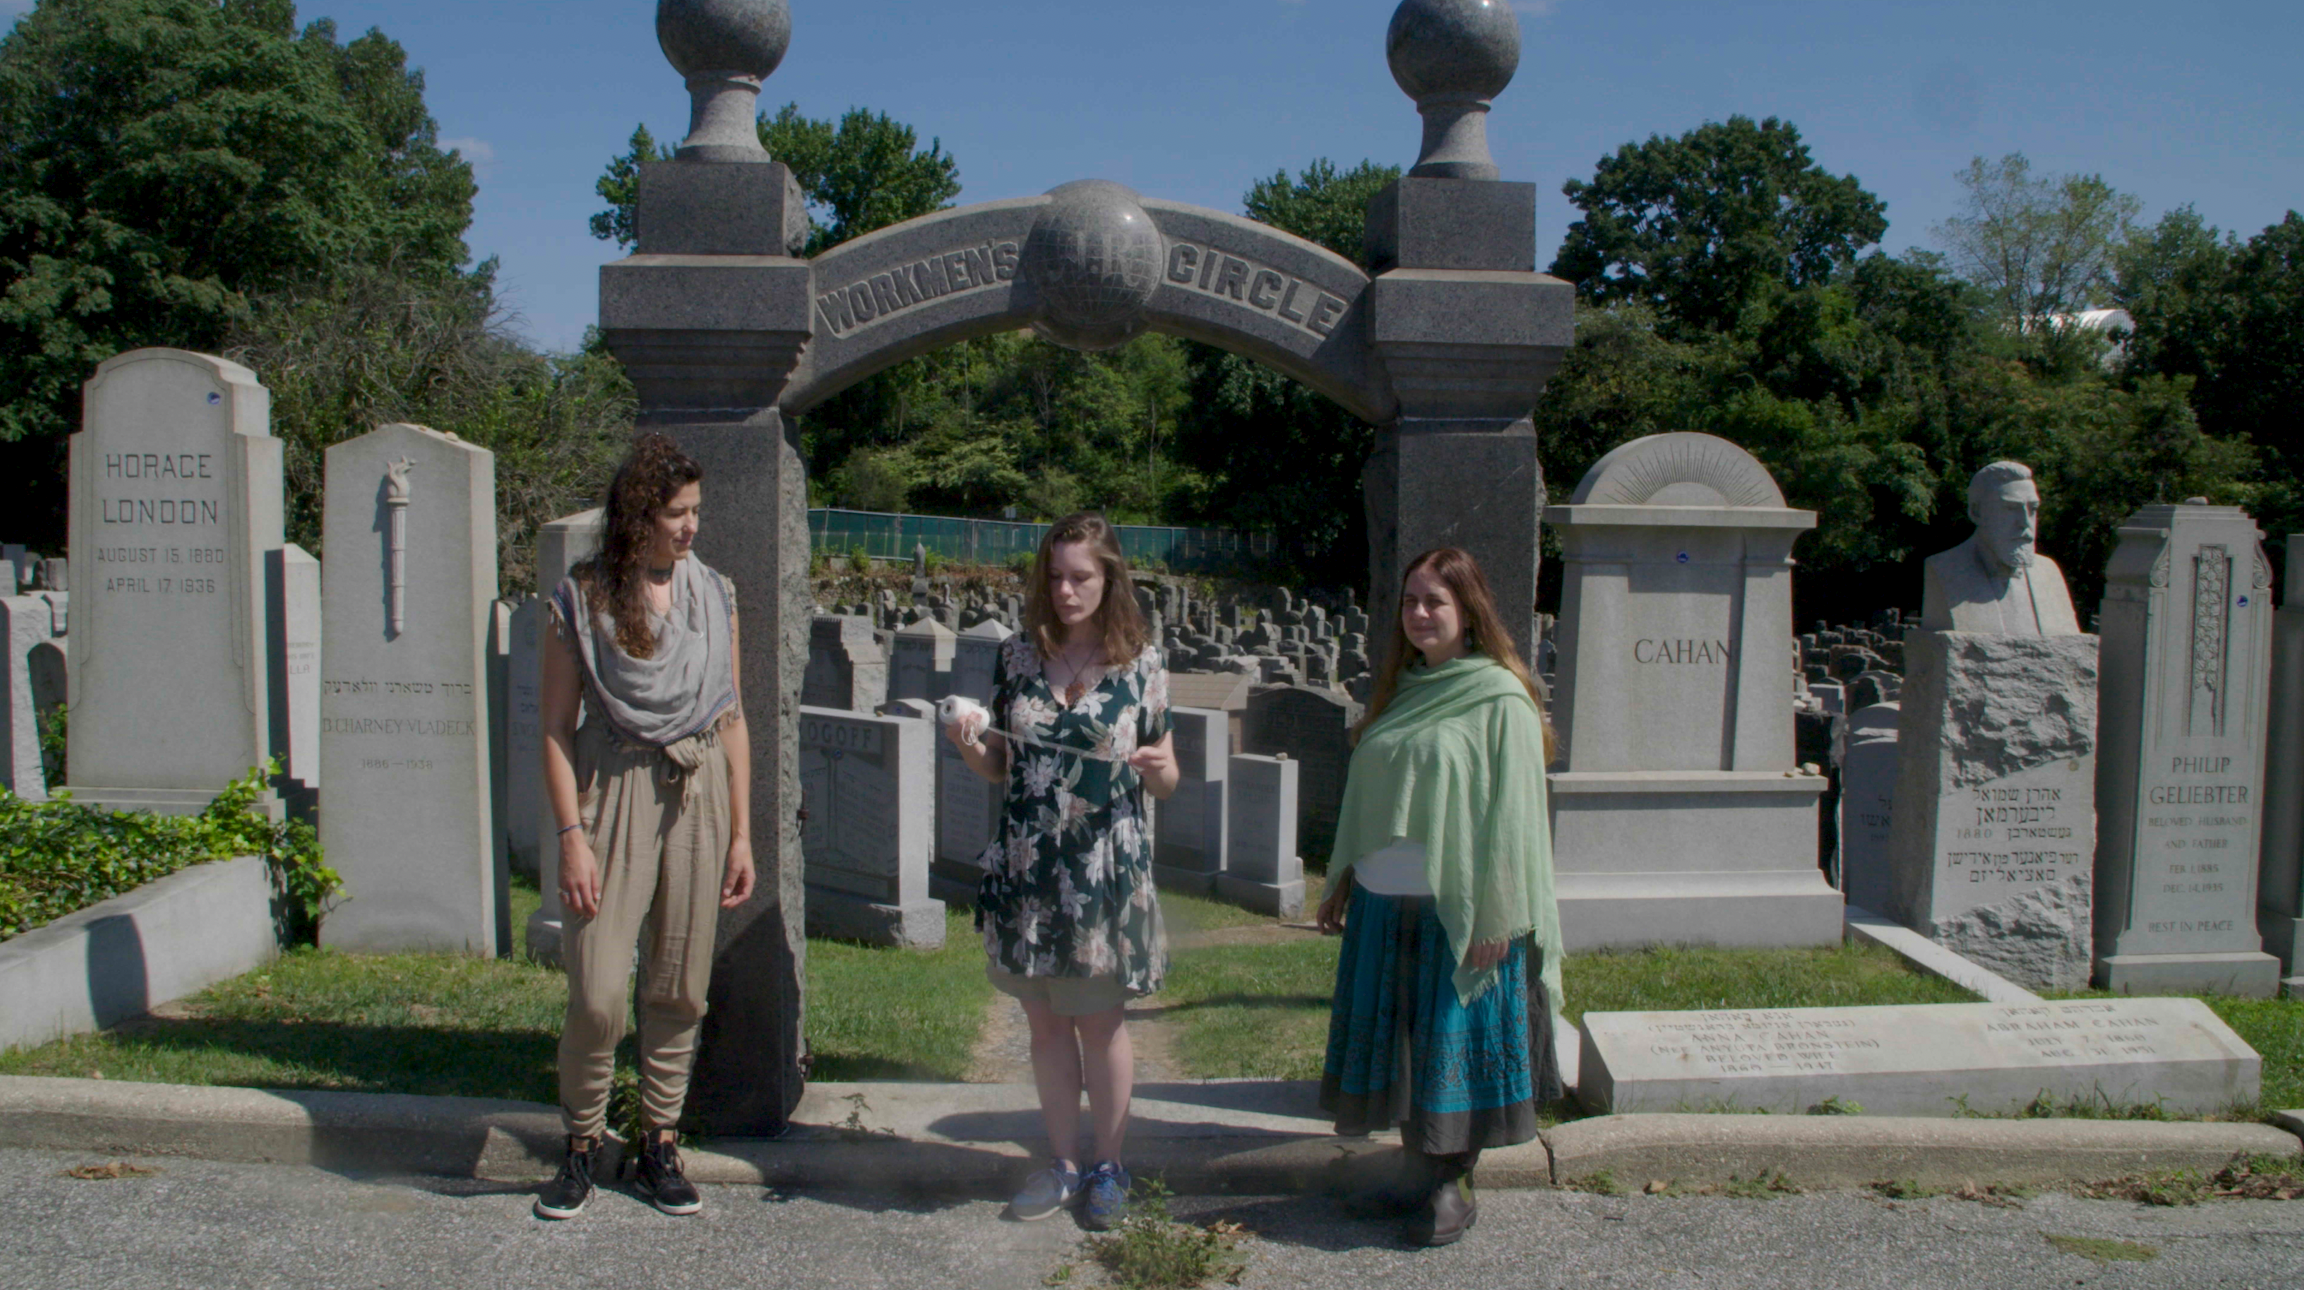 Three women stand at the gate of a cemetery